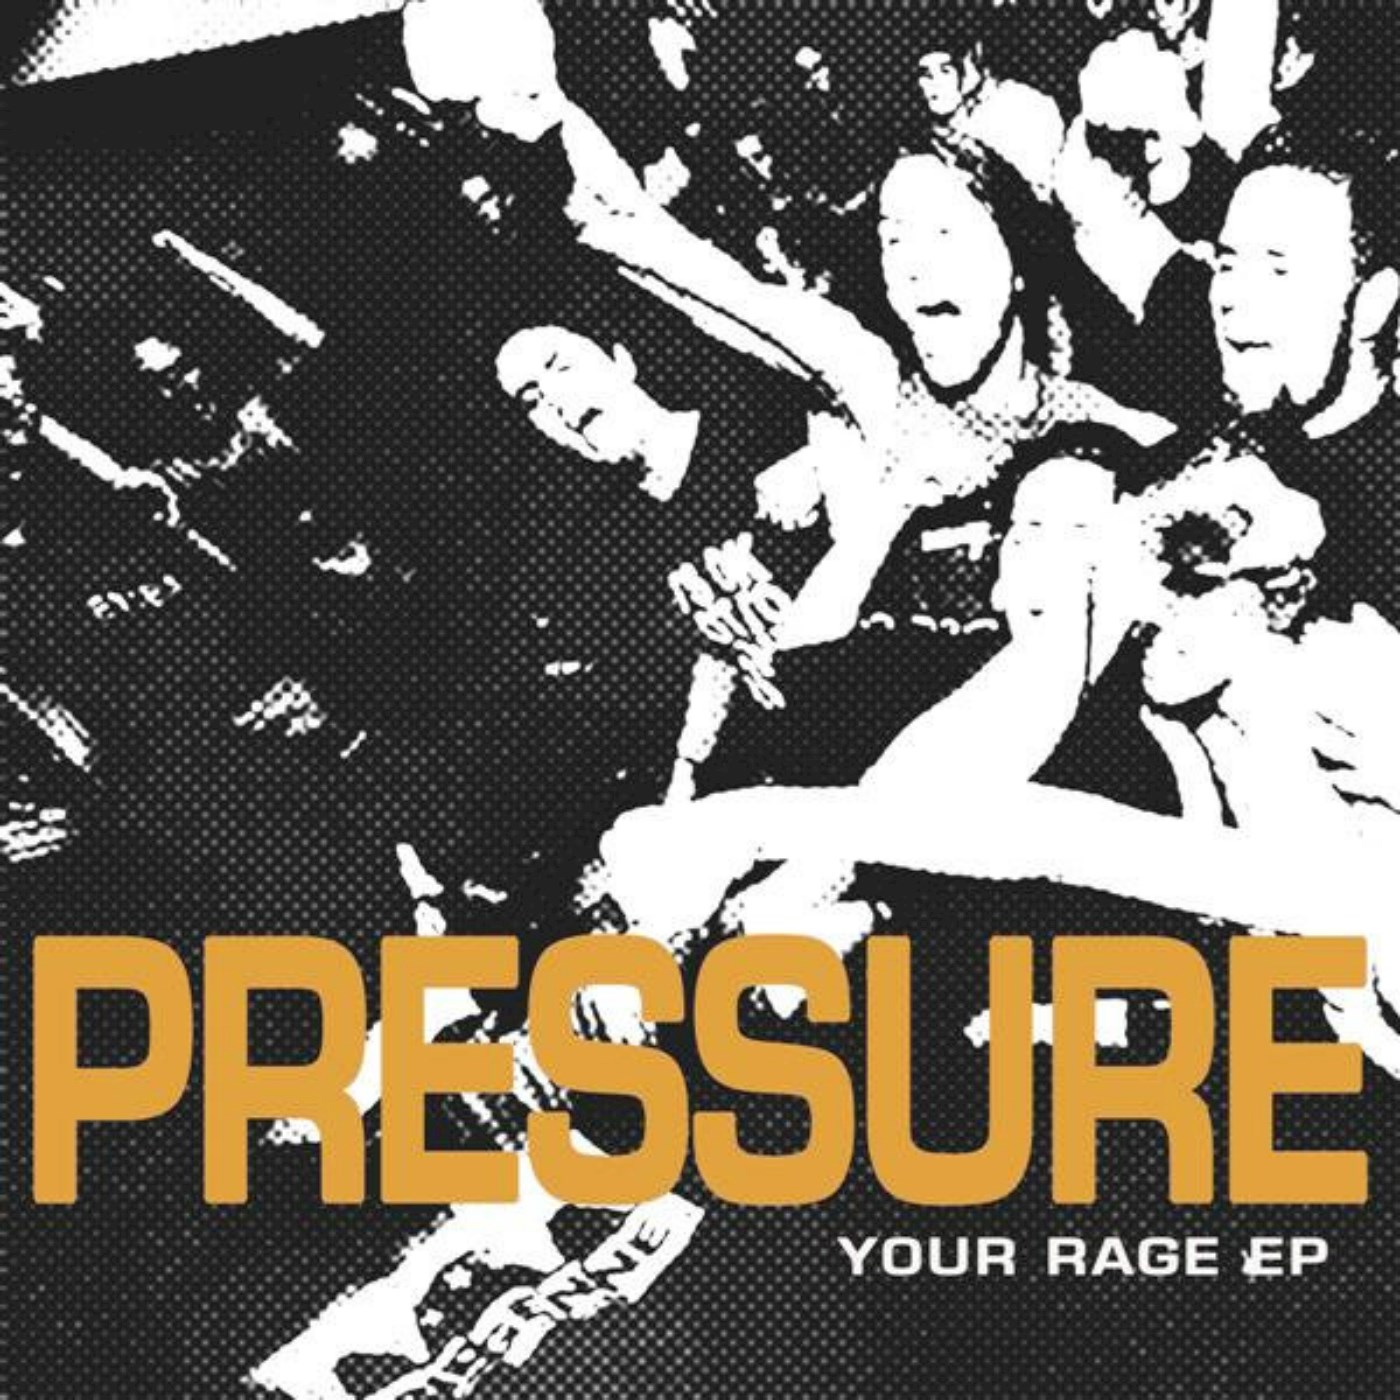 Your Rage EP